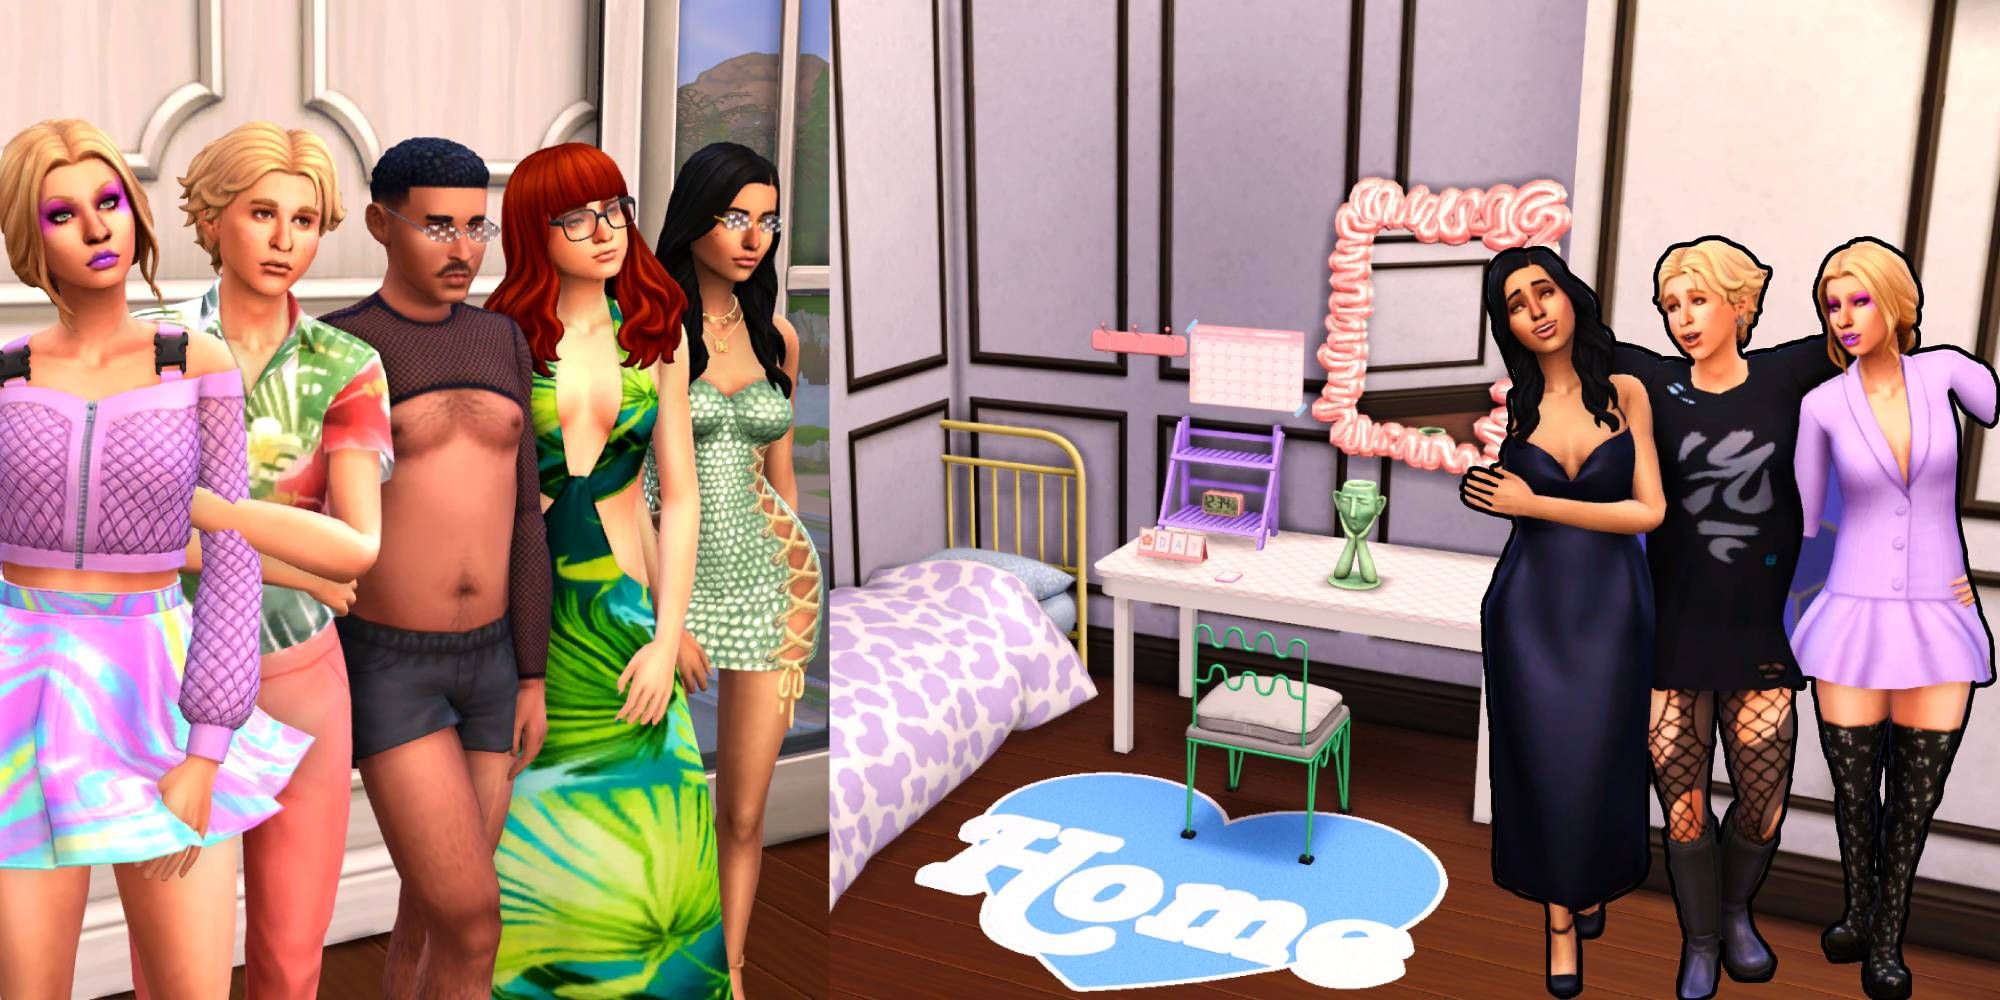 This Sims 4 Kit is 100% free! 